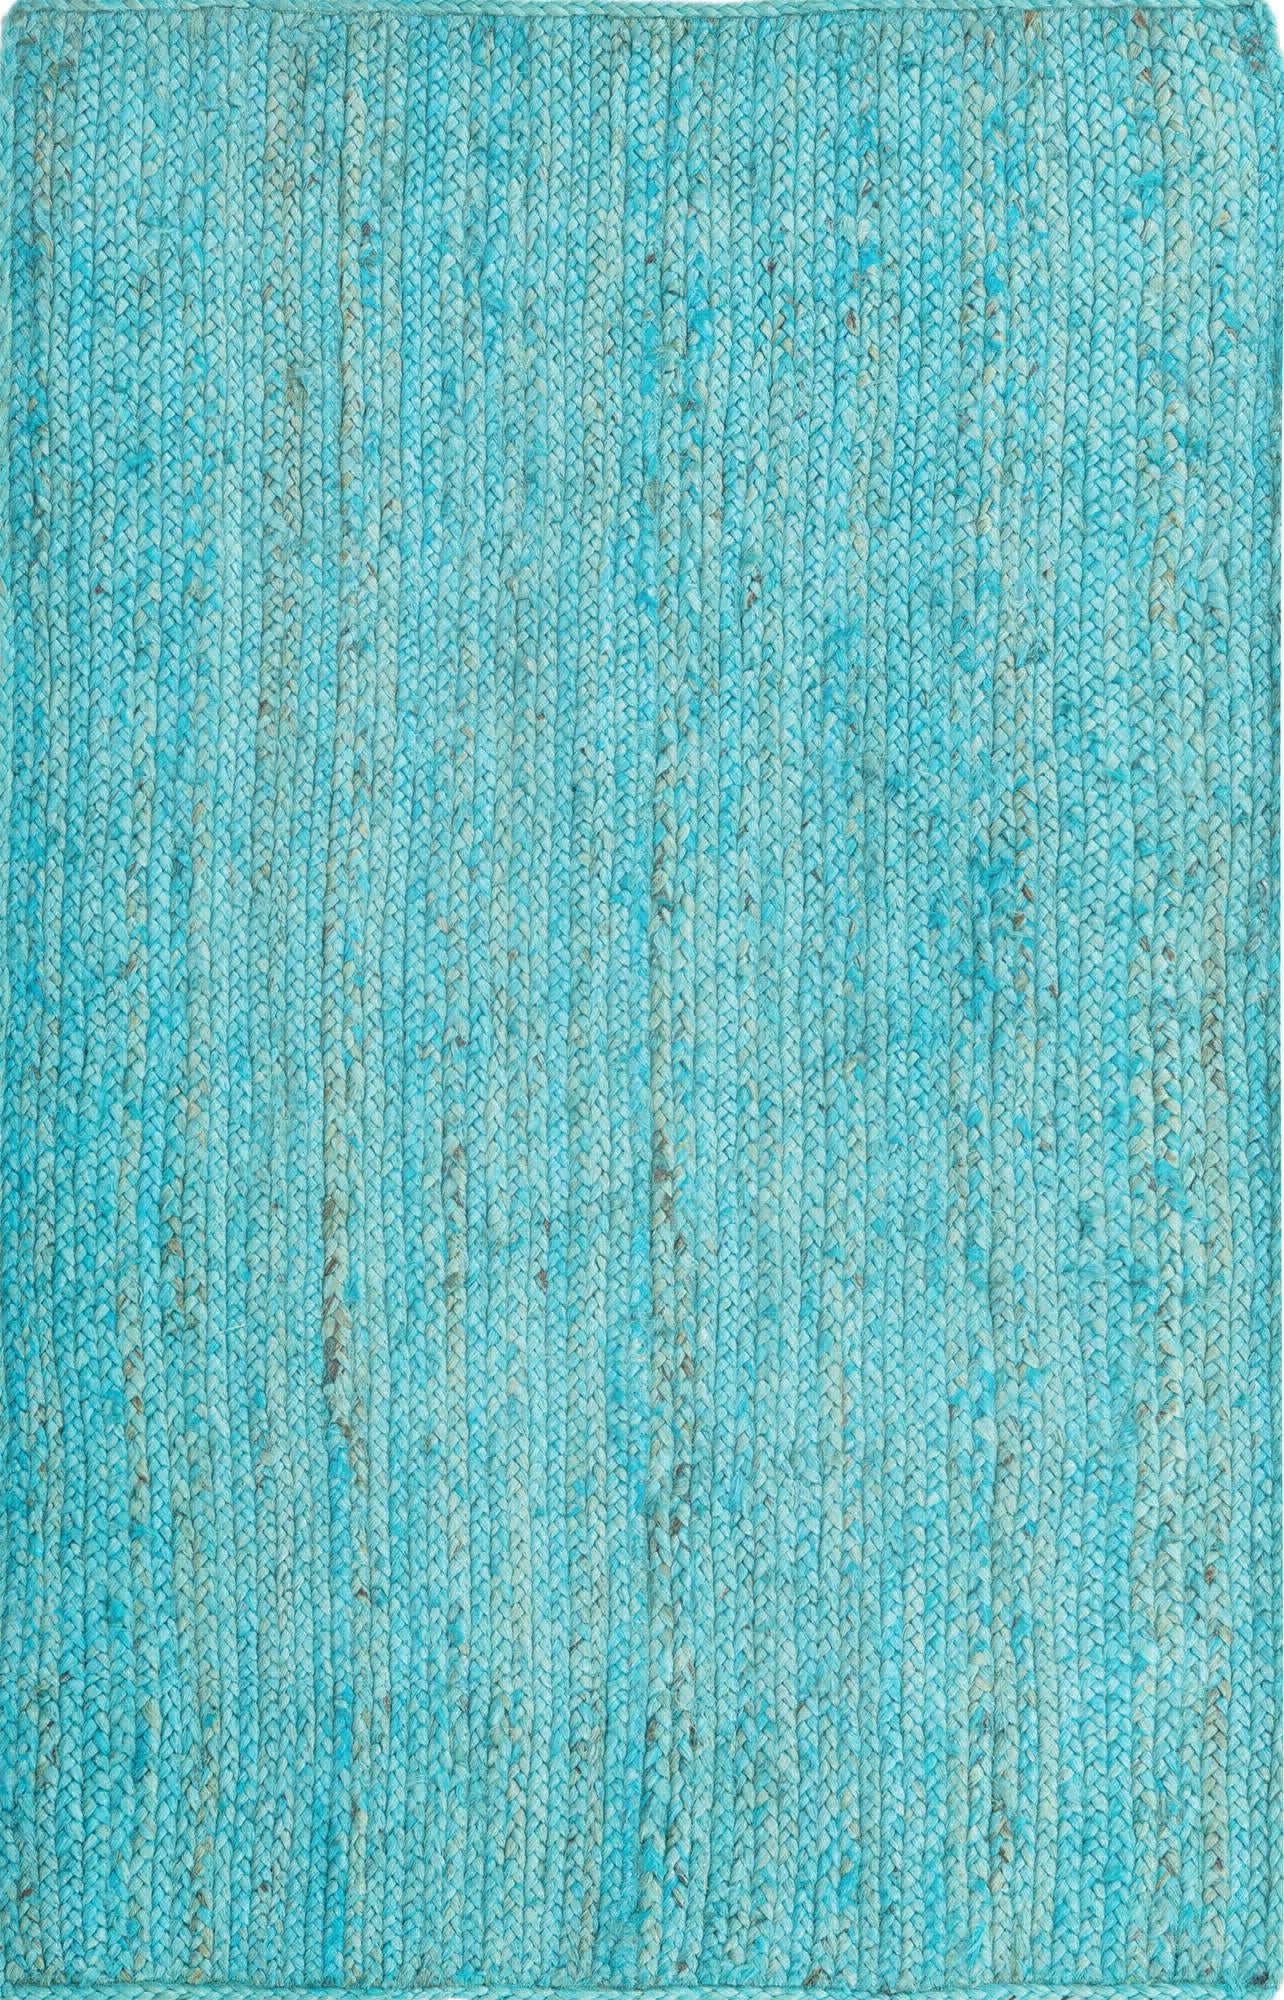 Unique Loom Braided Jute MGN-5-7-8 Turquoise Area Rug main image